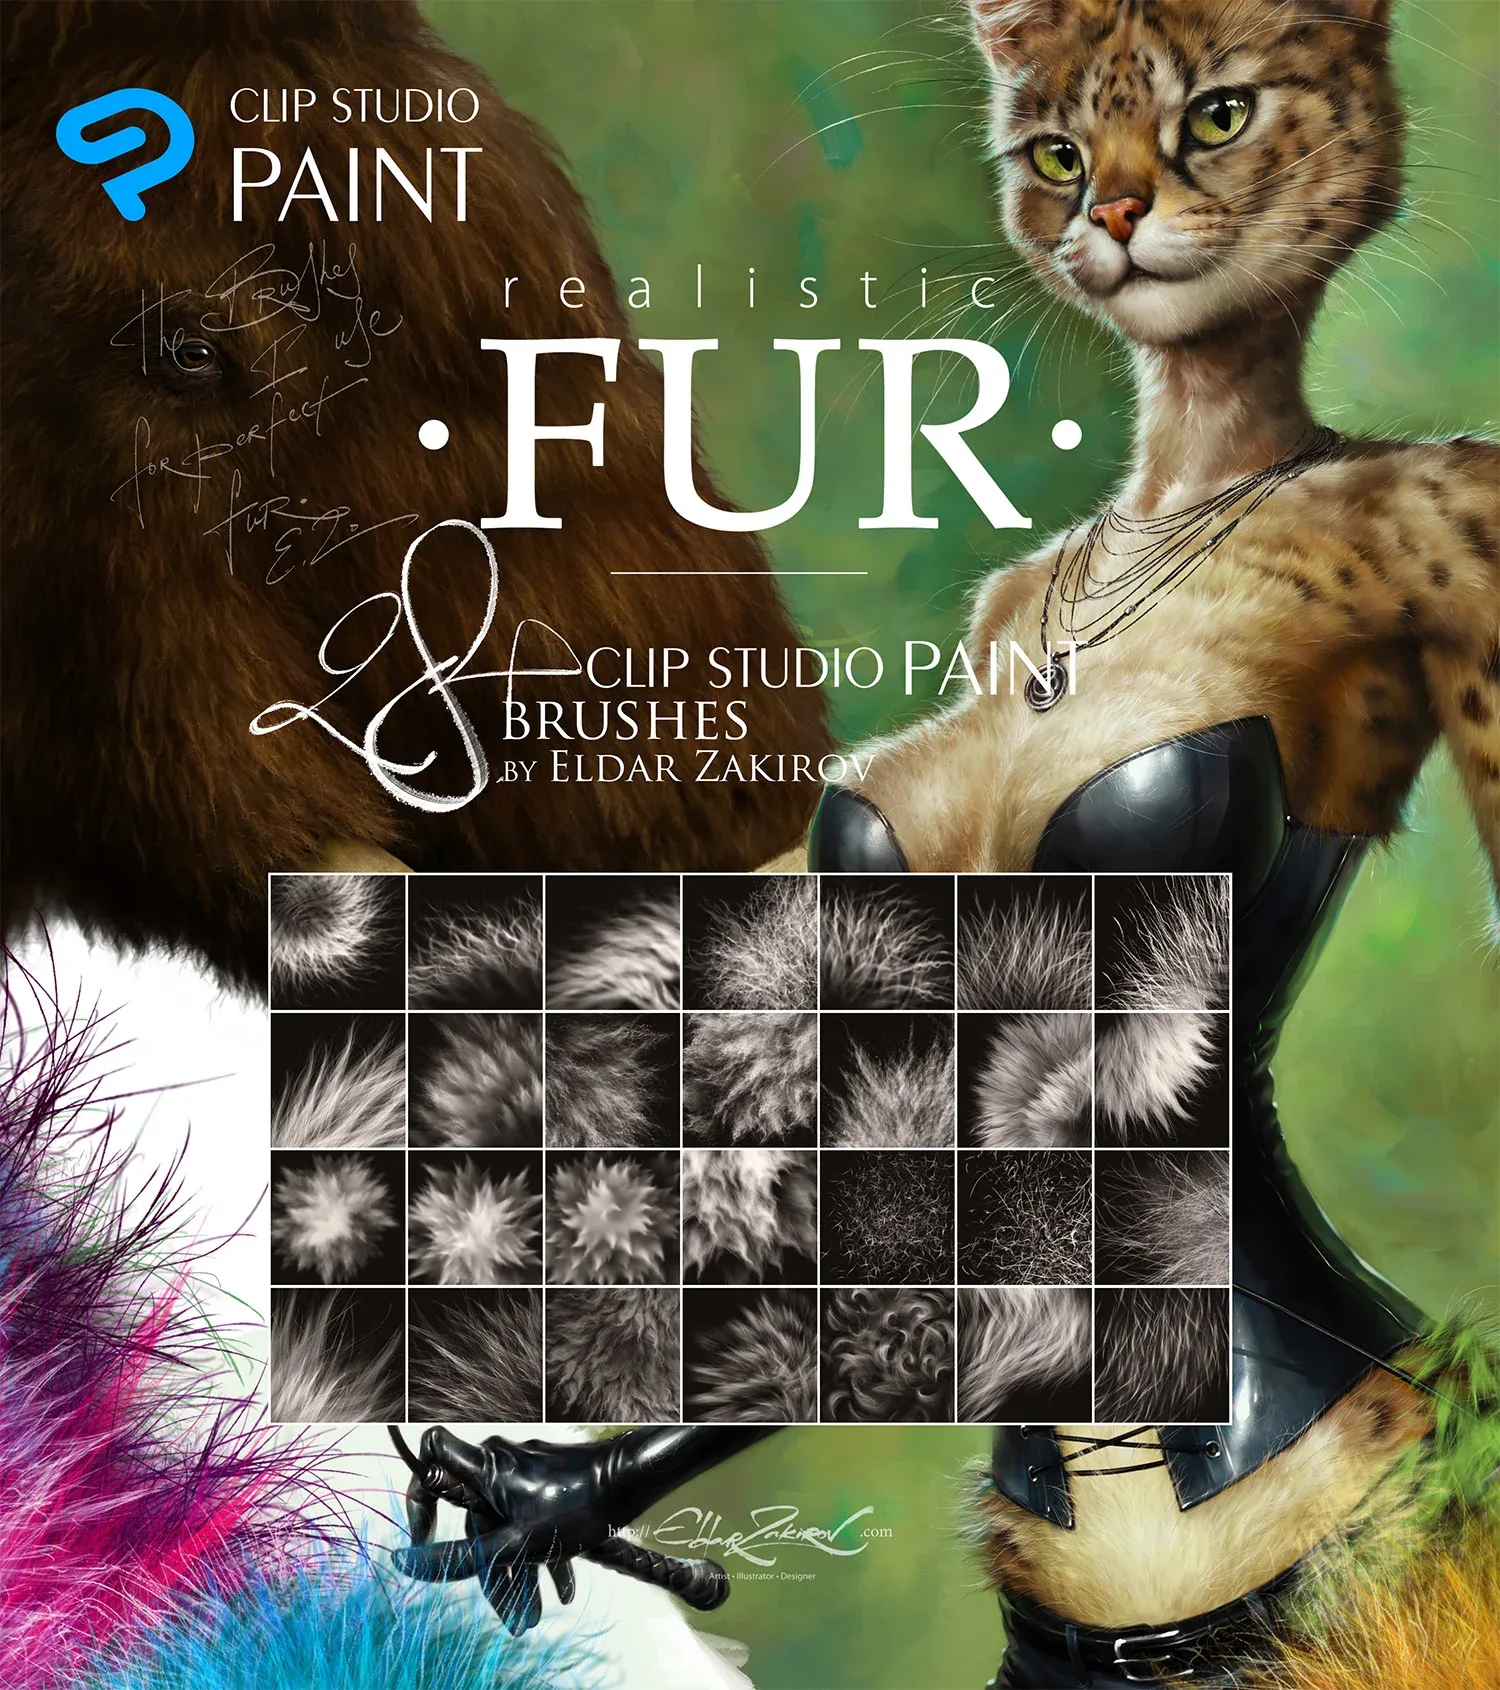 Realistic FUR: 28 Brushes for CLIP STUDIO PAINT for painting furries, animals, fluff, etc.